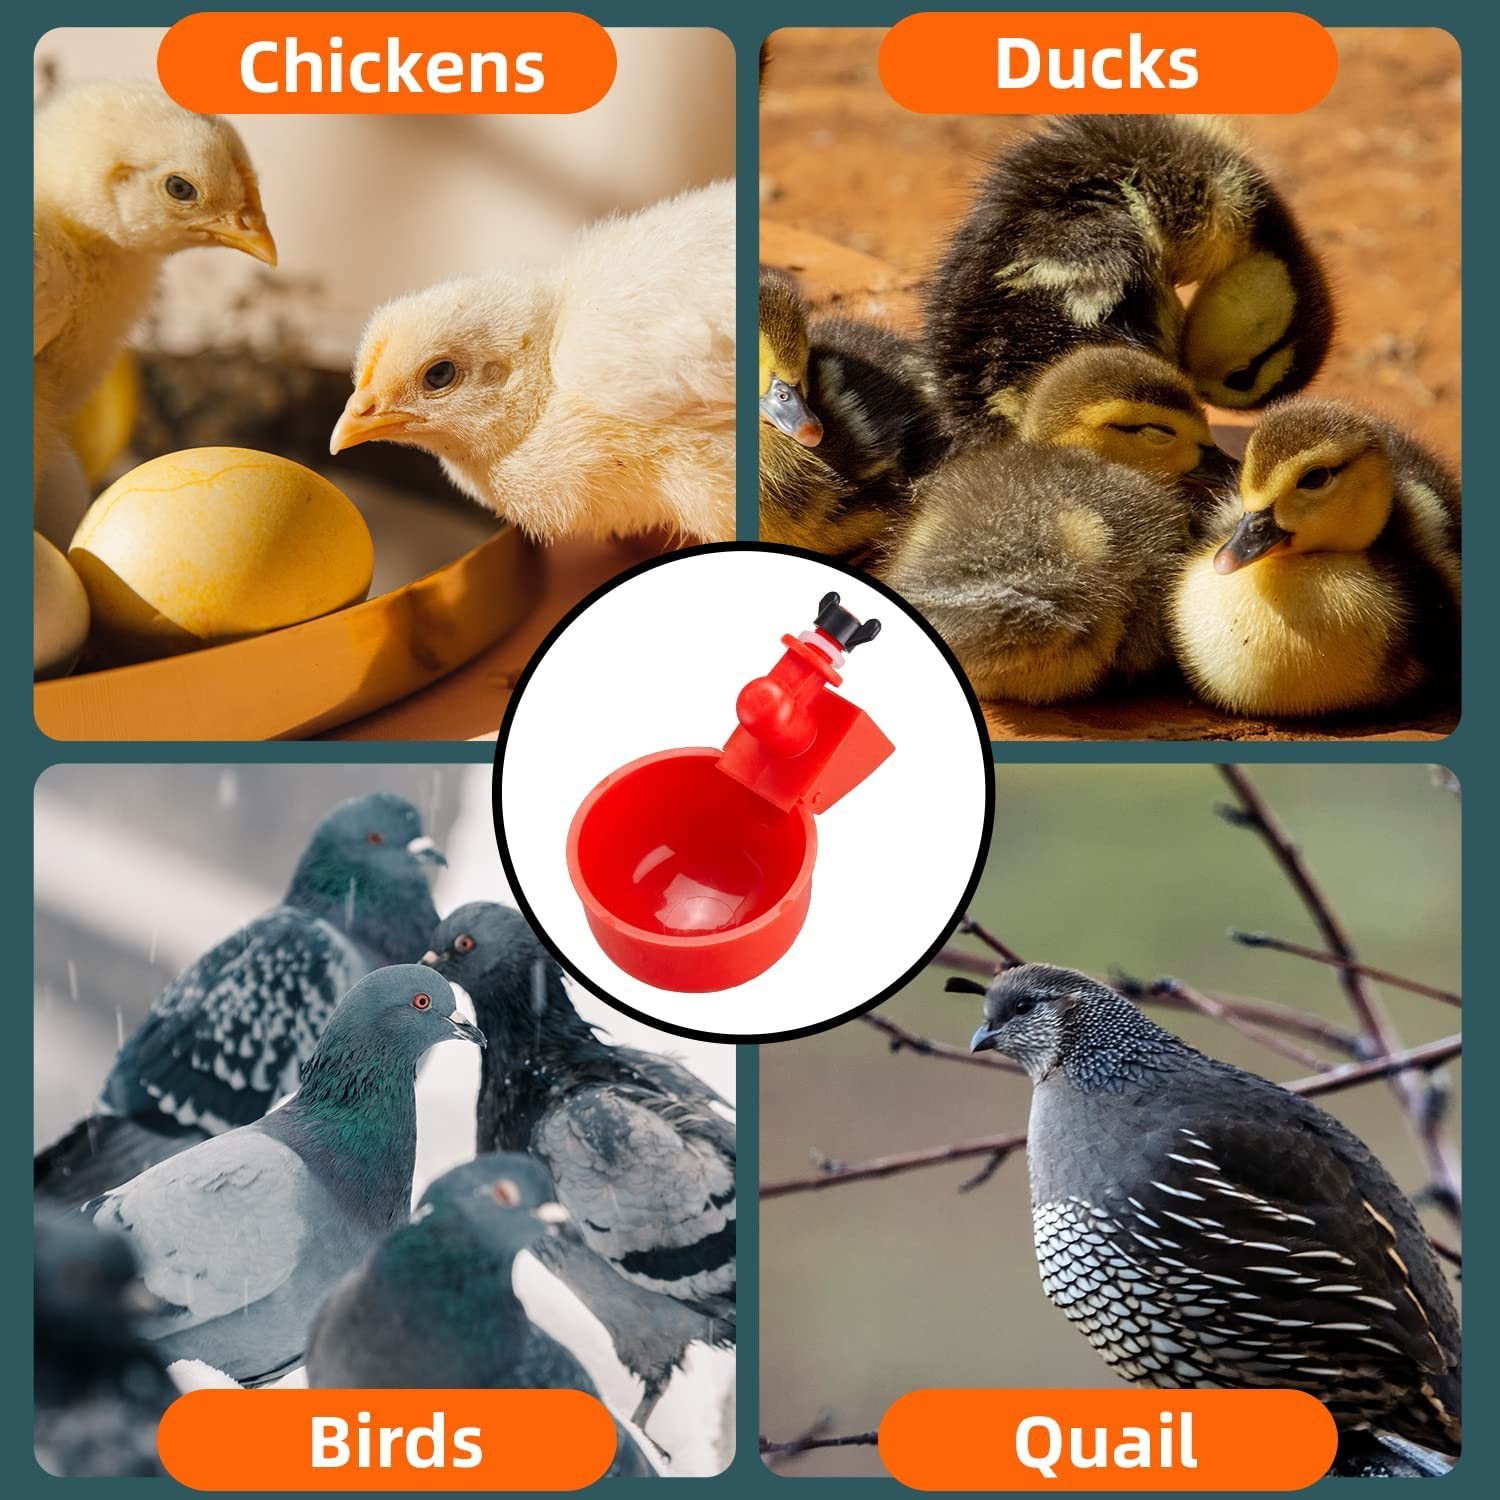 Poultry Water Bowls